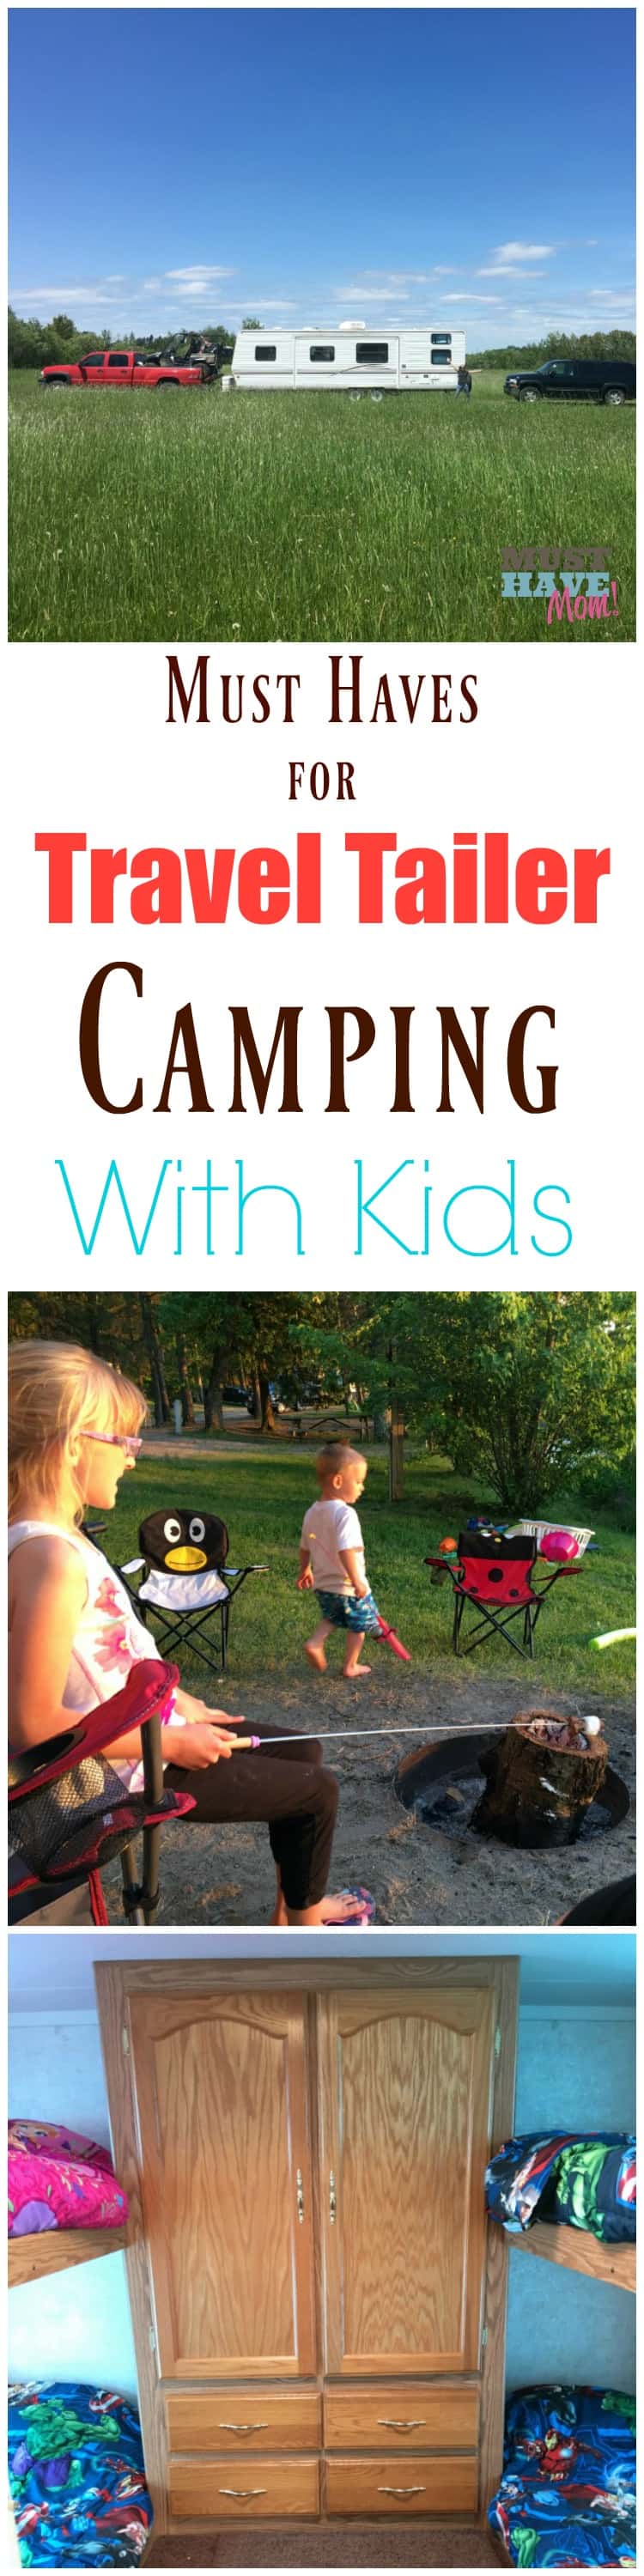 10 Must haves for travel trailer camping with kids. Make sure you have these 10 things on your next camping with kids trip!